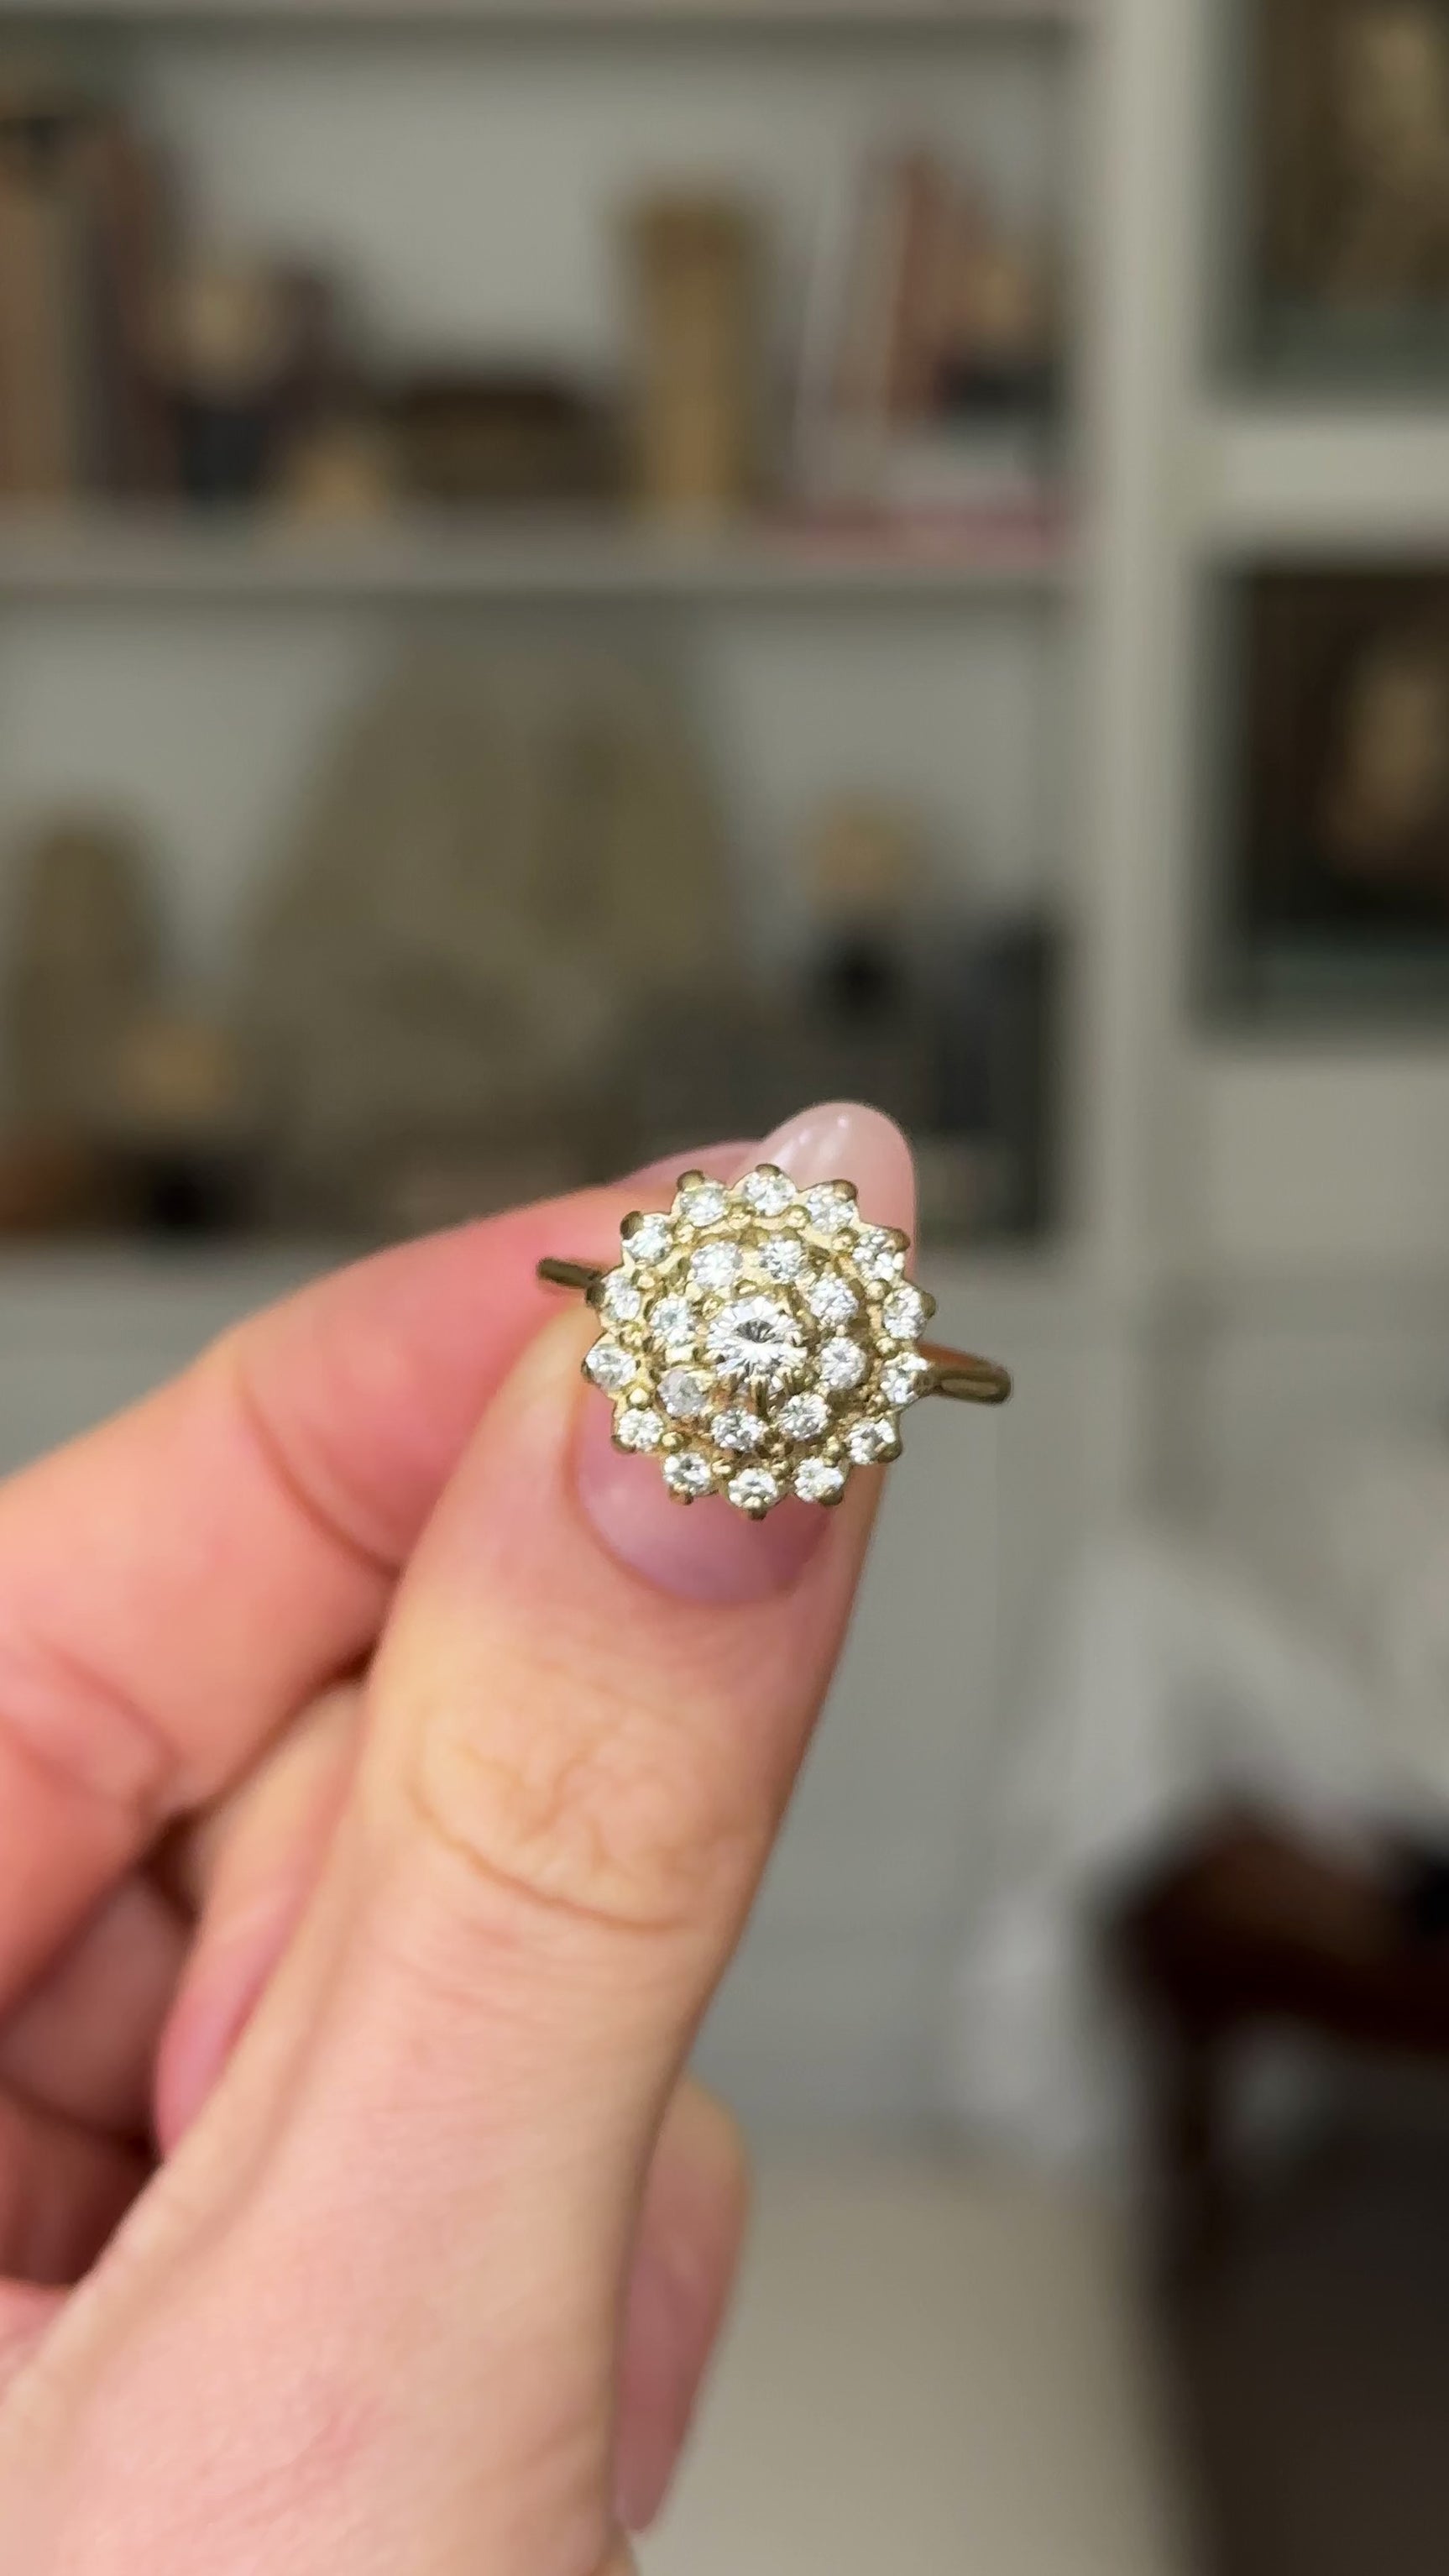 Vintage, 1970s Large Diamond Cluster Ring, 18ct Yellow Gold held in fingers and rotated to give perspective.